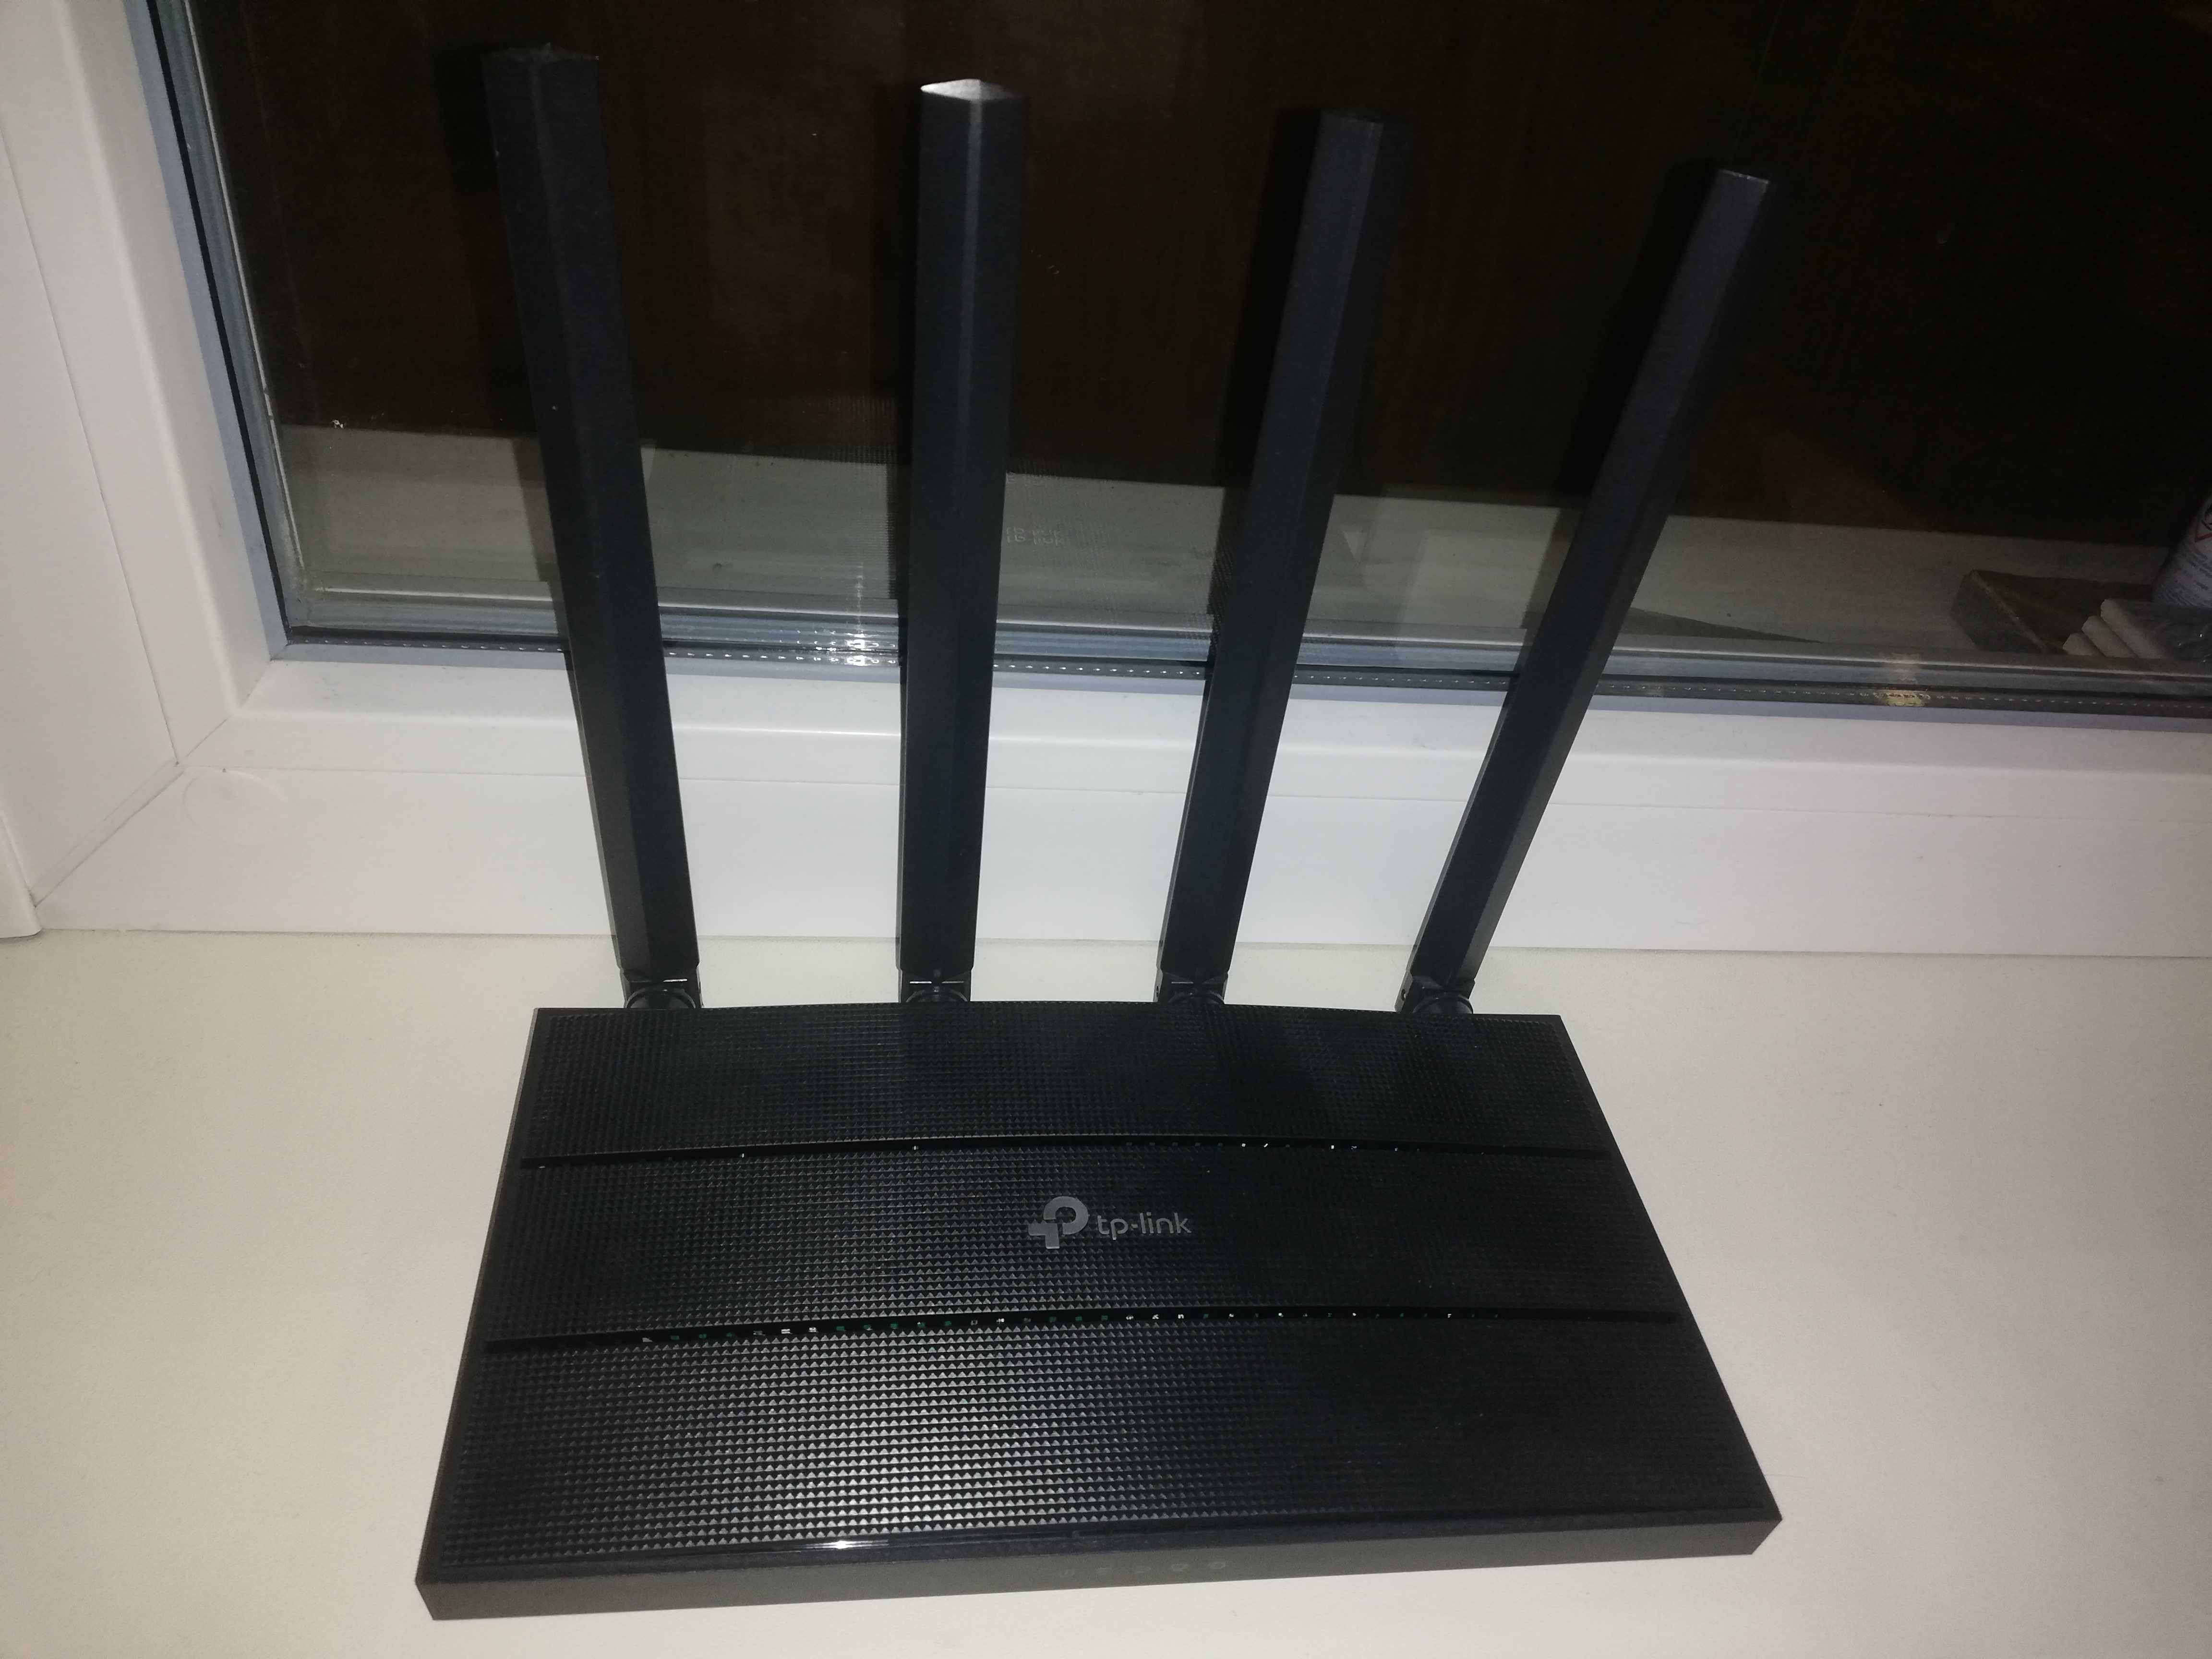 Маршрутизатор TP-LINK Archer C80